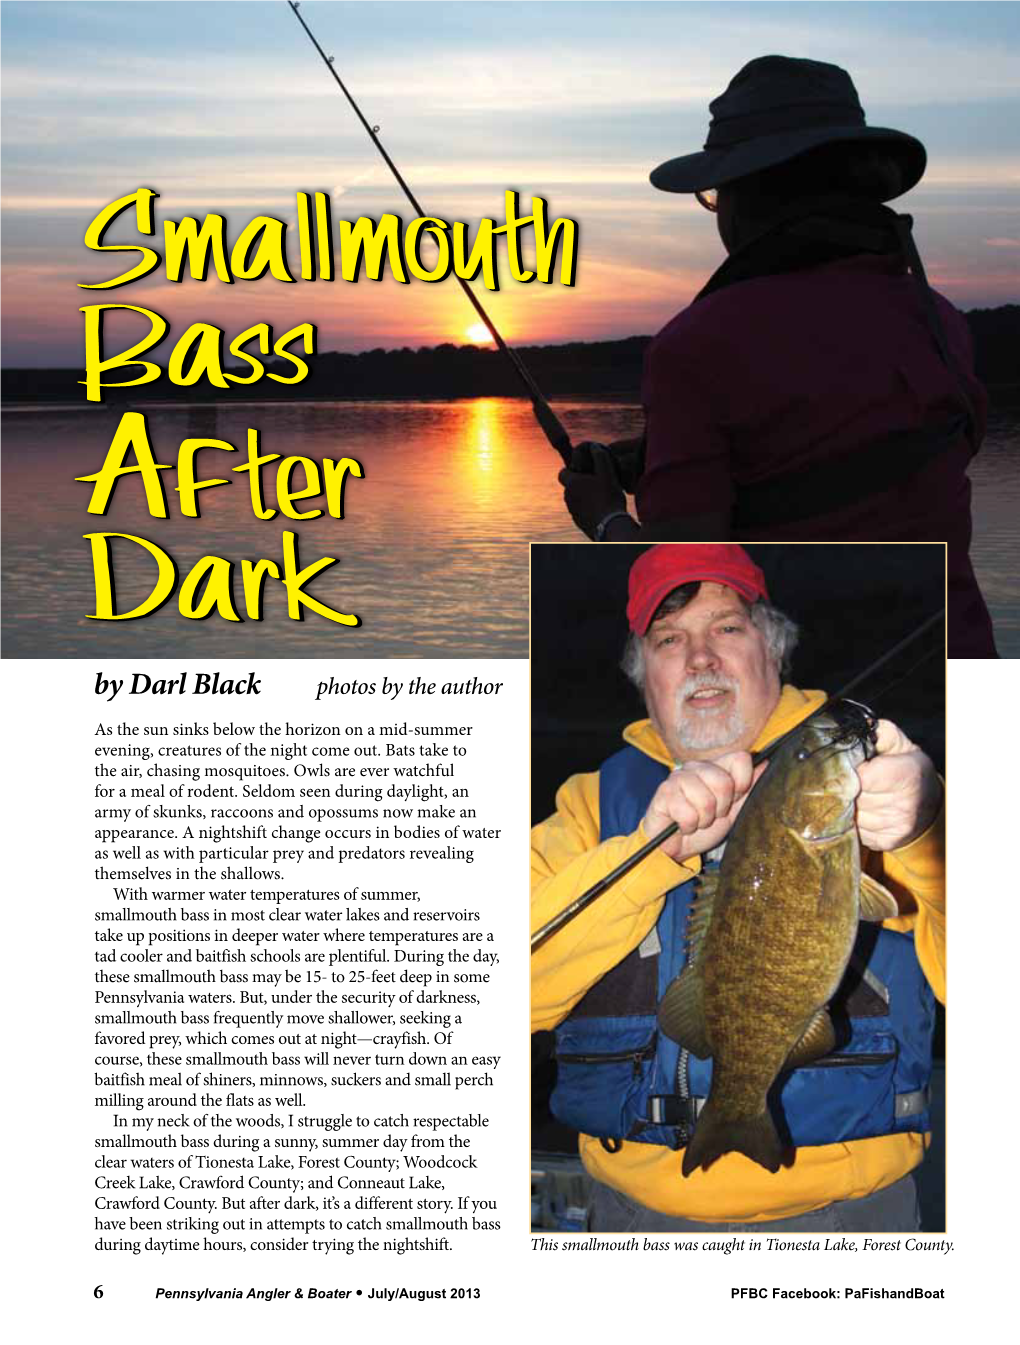 Smallmouth Bass After Dark by Darl Black